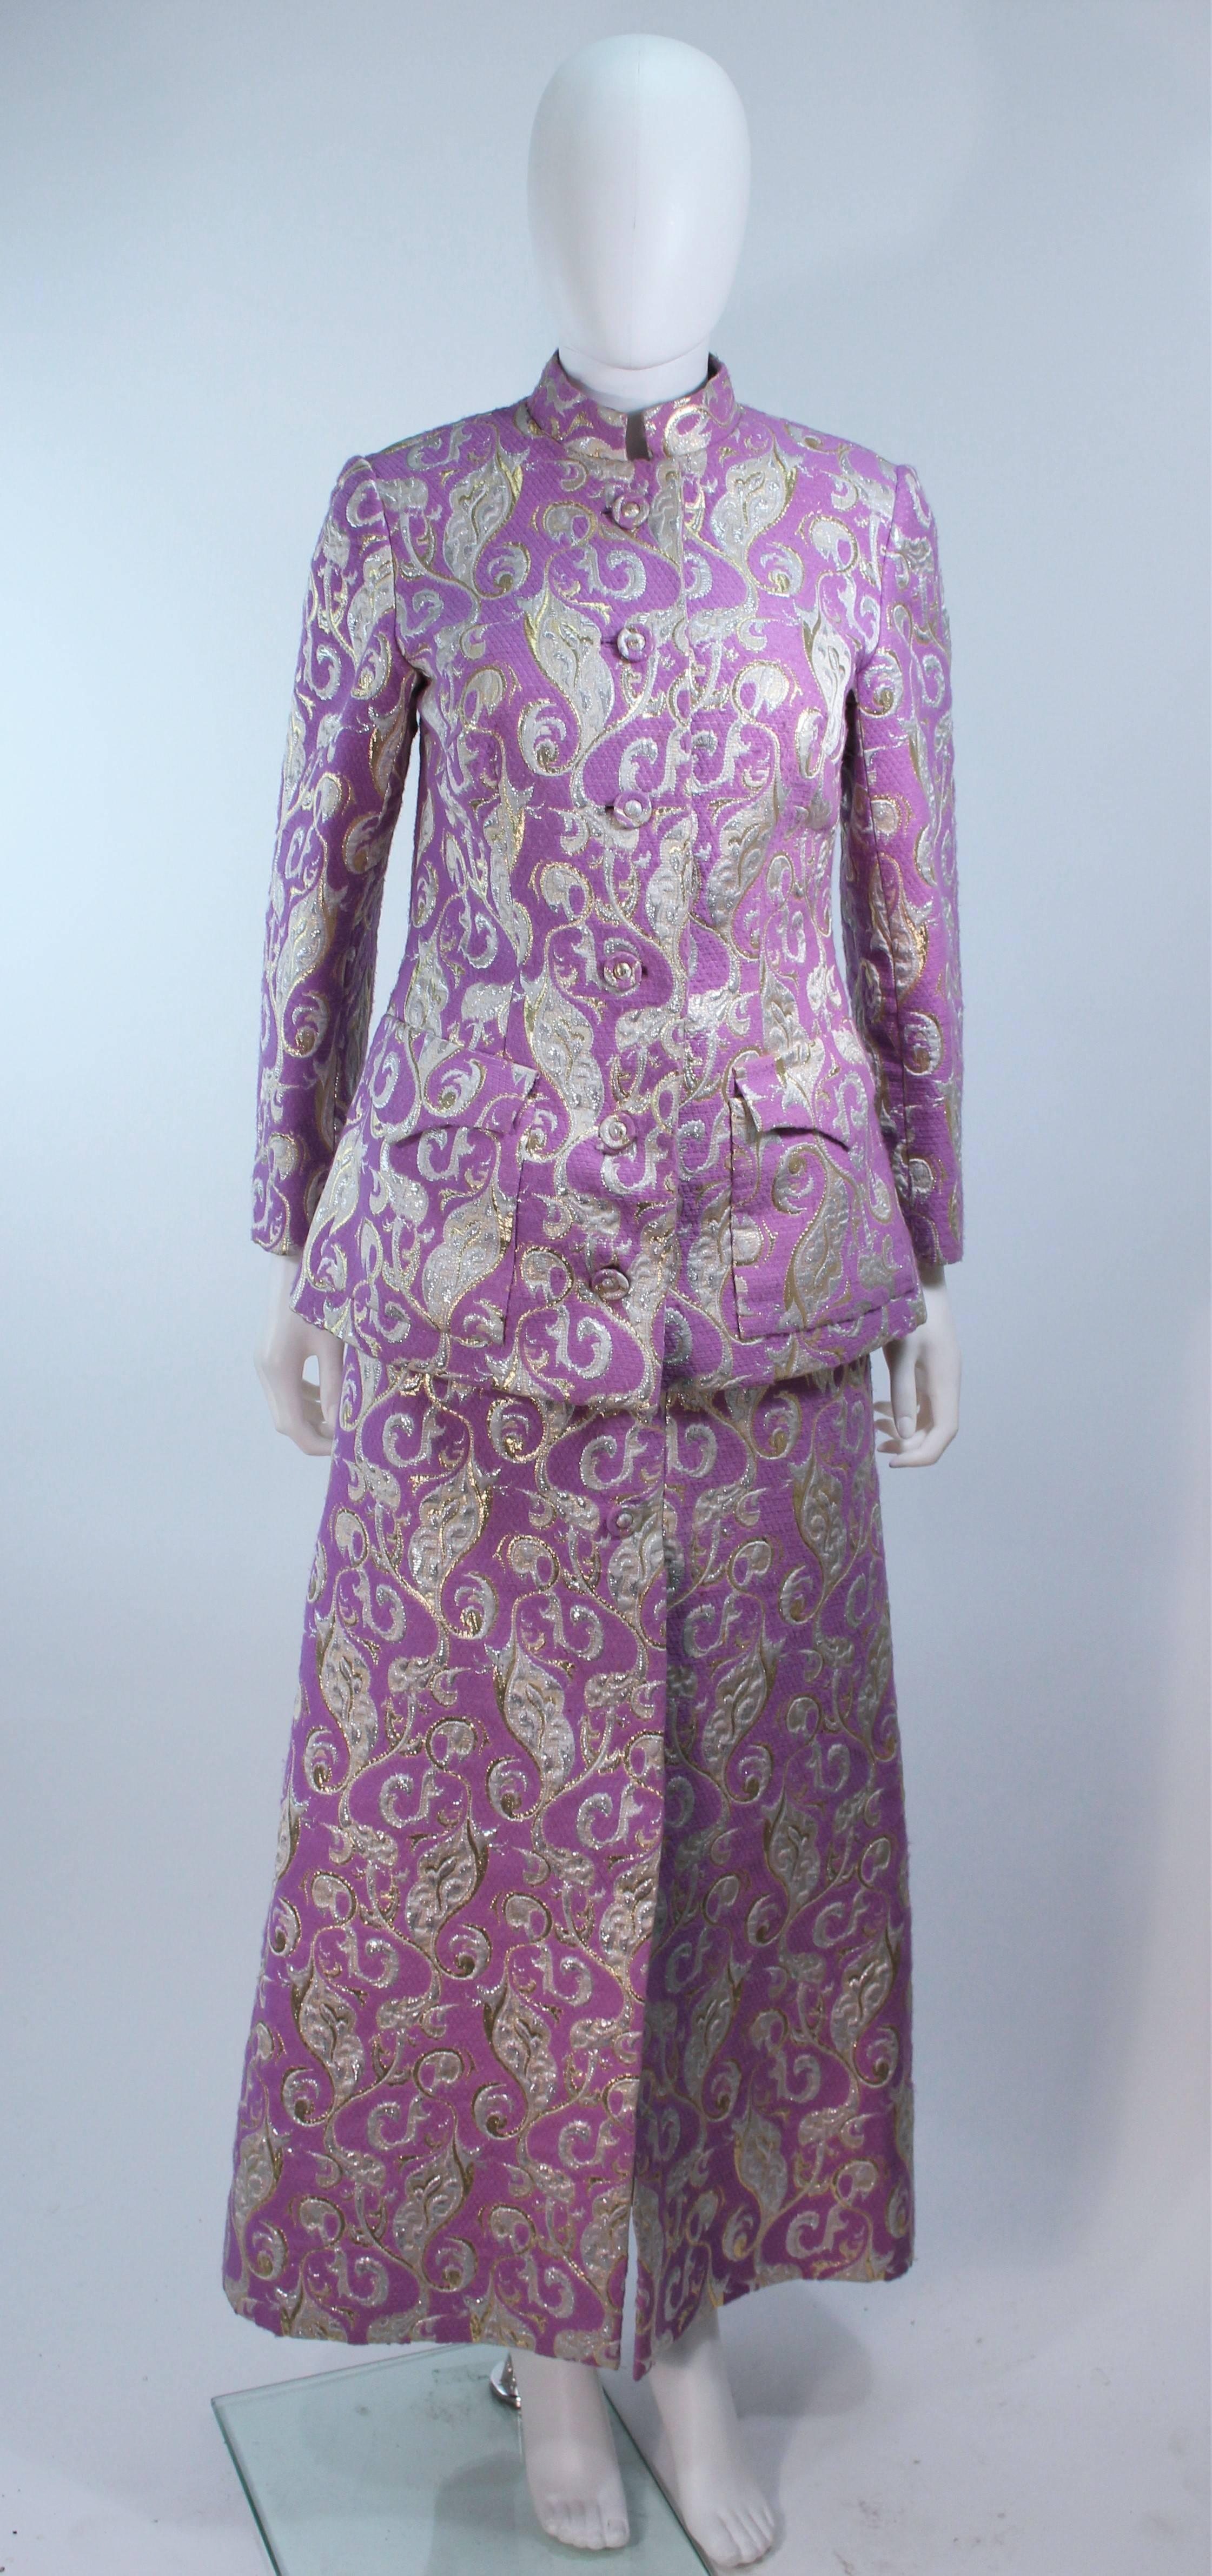  This ensemble is composed of a purple (lilac/lavender) hue brocade with metallic accents. The jacket and skirt feature center button closures. The Jacket has a mandarin/safari style. The skirt has button accents and a zipper closure. In great